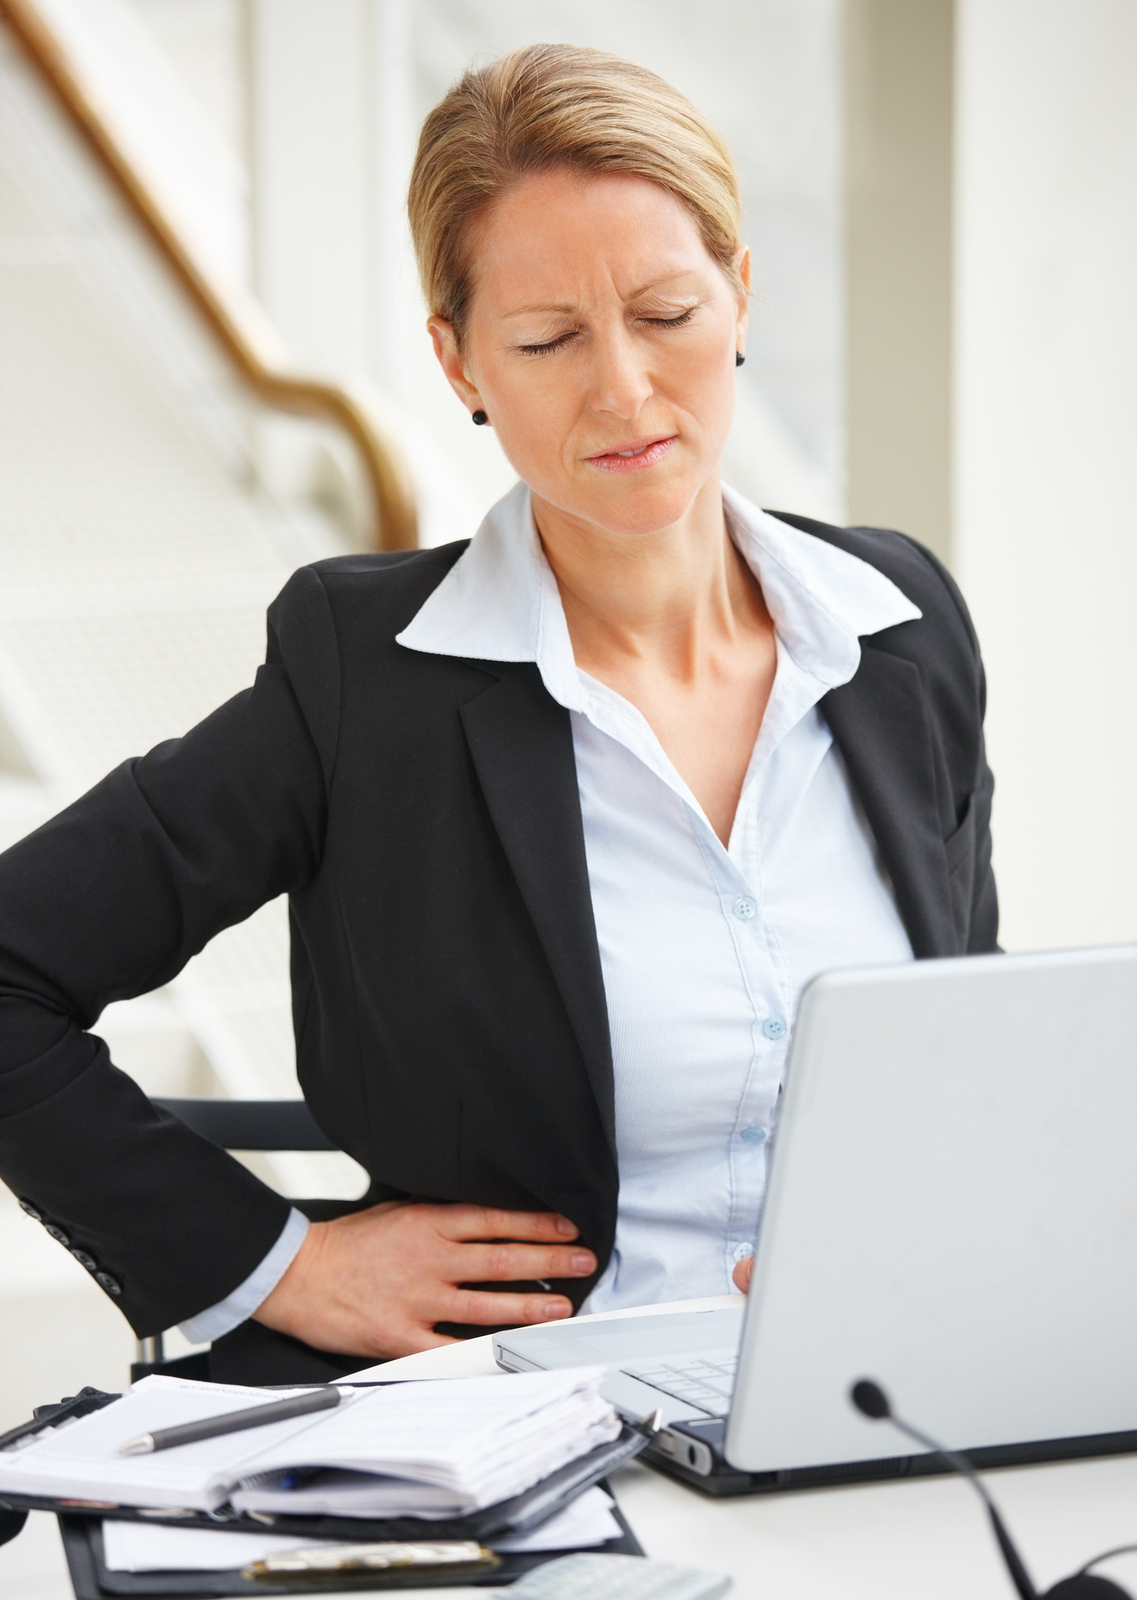 Woman appearing to be suffering from lower back pain